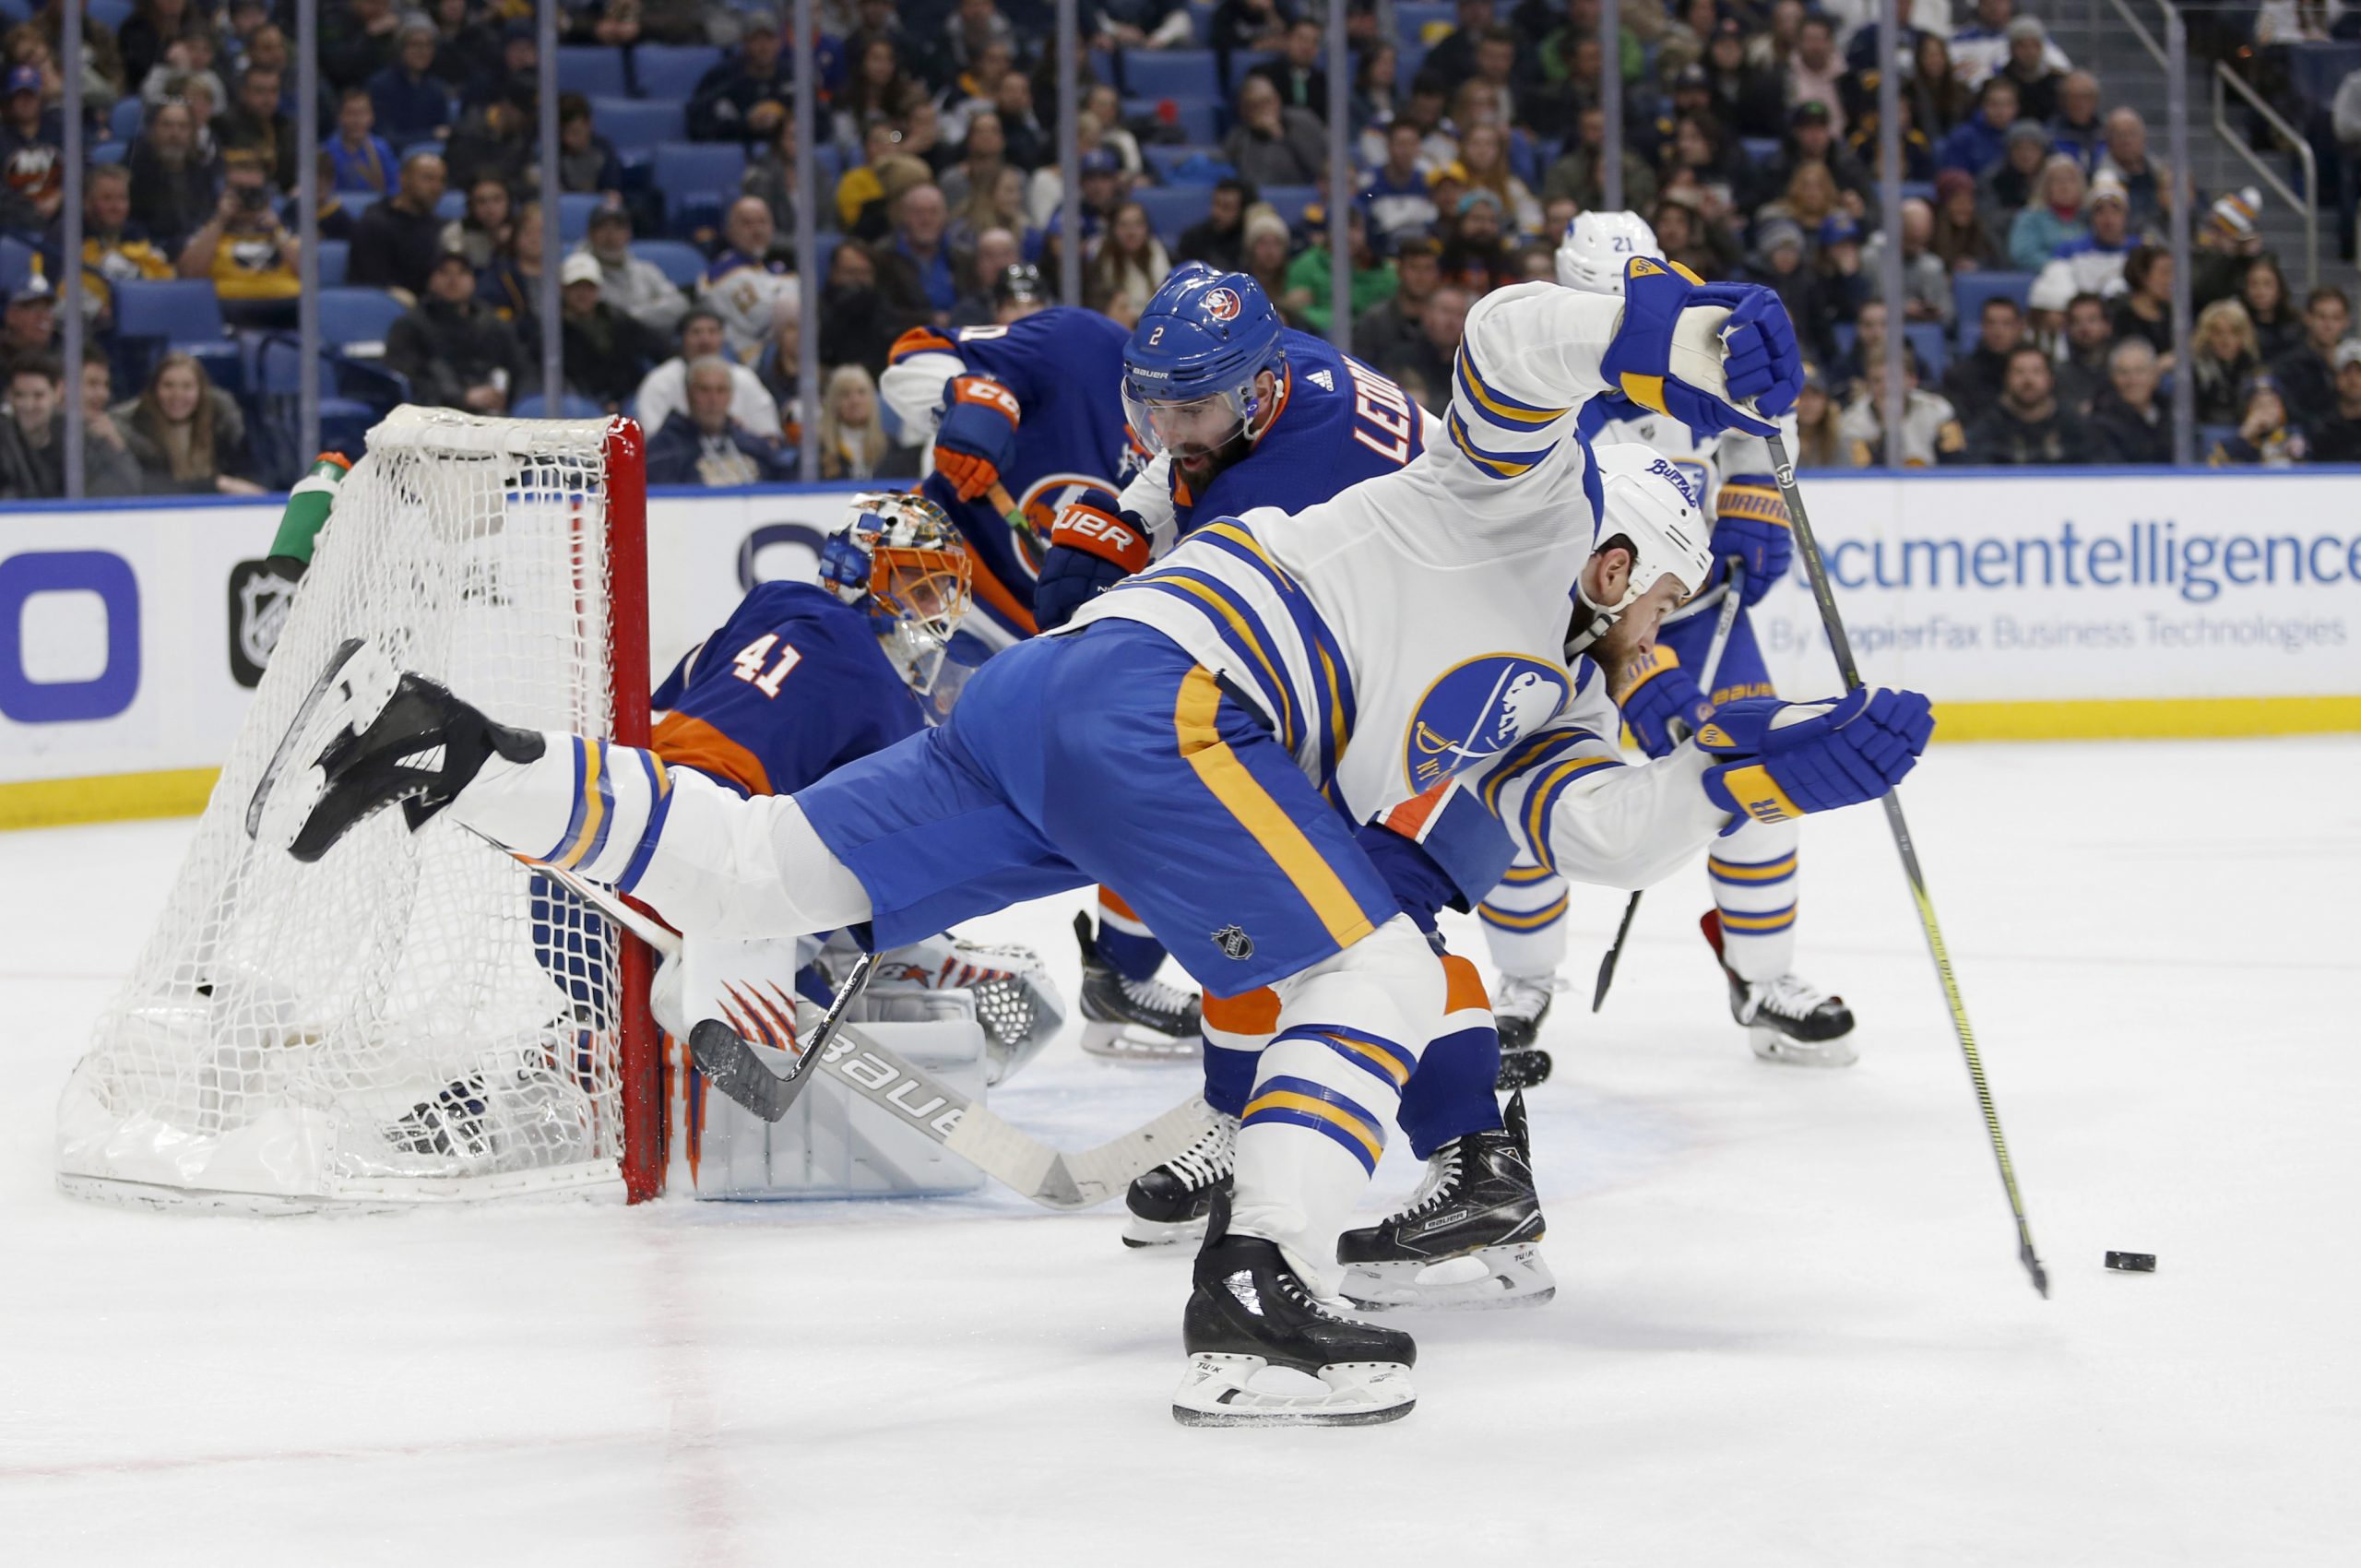 Feb 8, 2018; Buffalo, NY, USA; Buffalo Sabres center Ryan O'Reilly (90) dives to take a shot on goal during the second period against the New York Islanders at KeyBank Center. Mandatory Credit: Timothy T. Ludwig-USA TODAY Sports